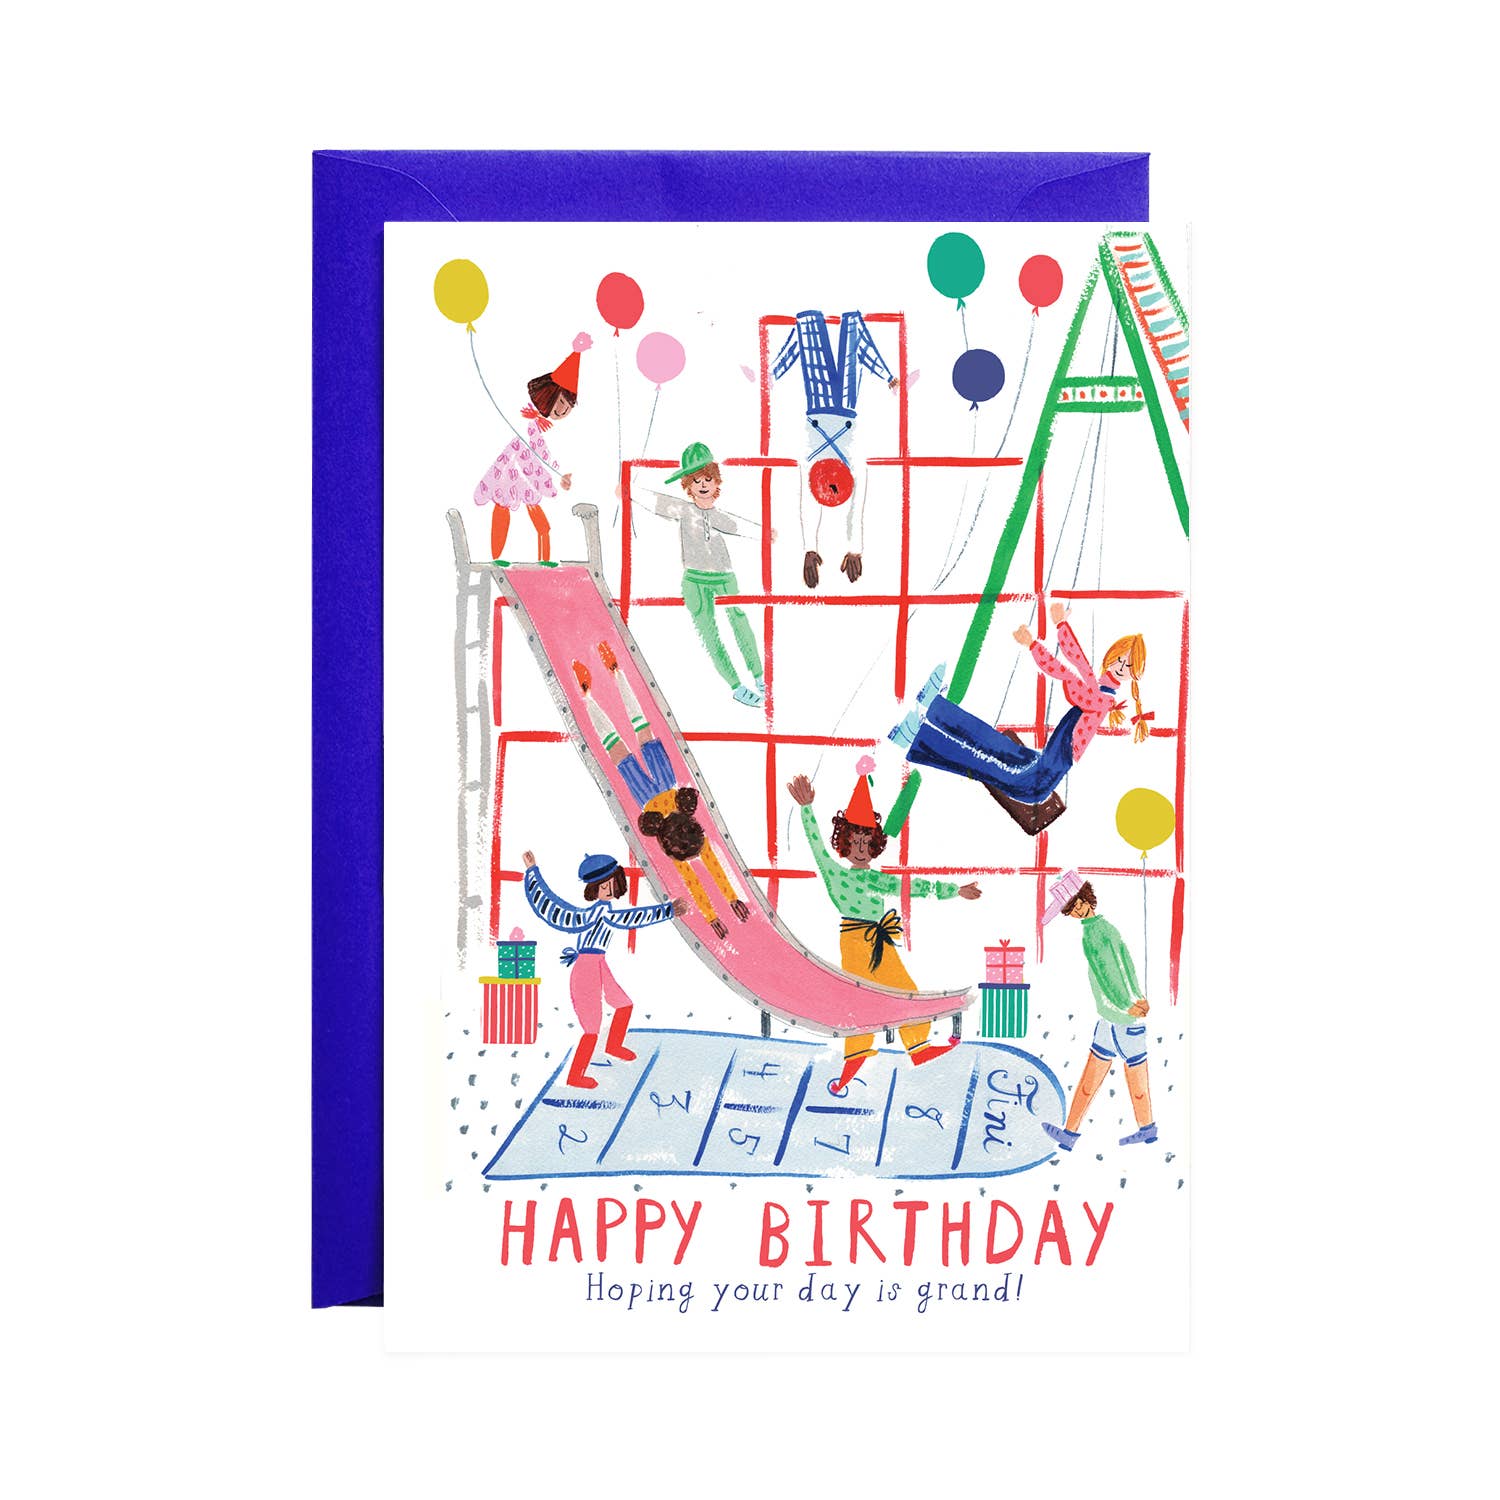 Down the Slide with Balloons Card